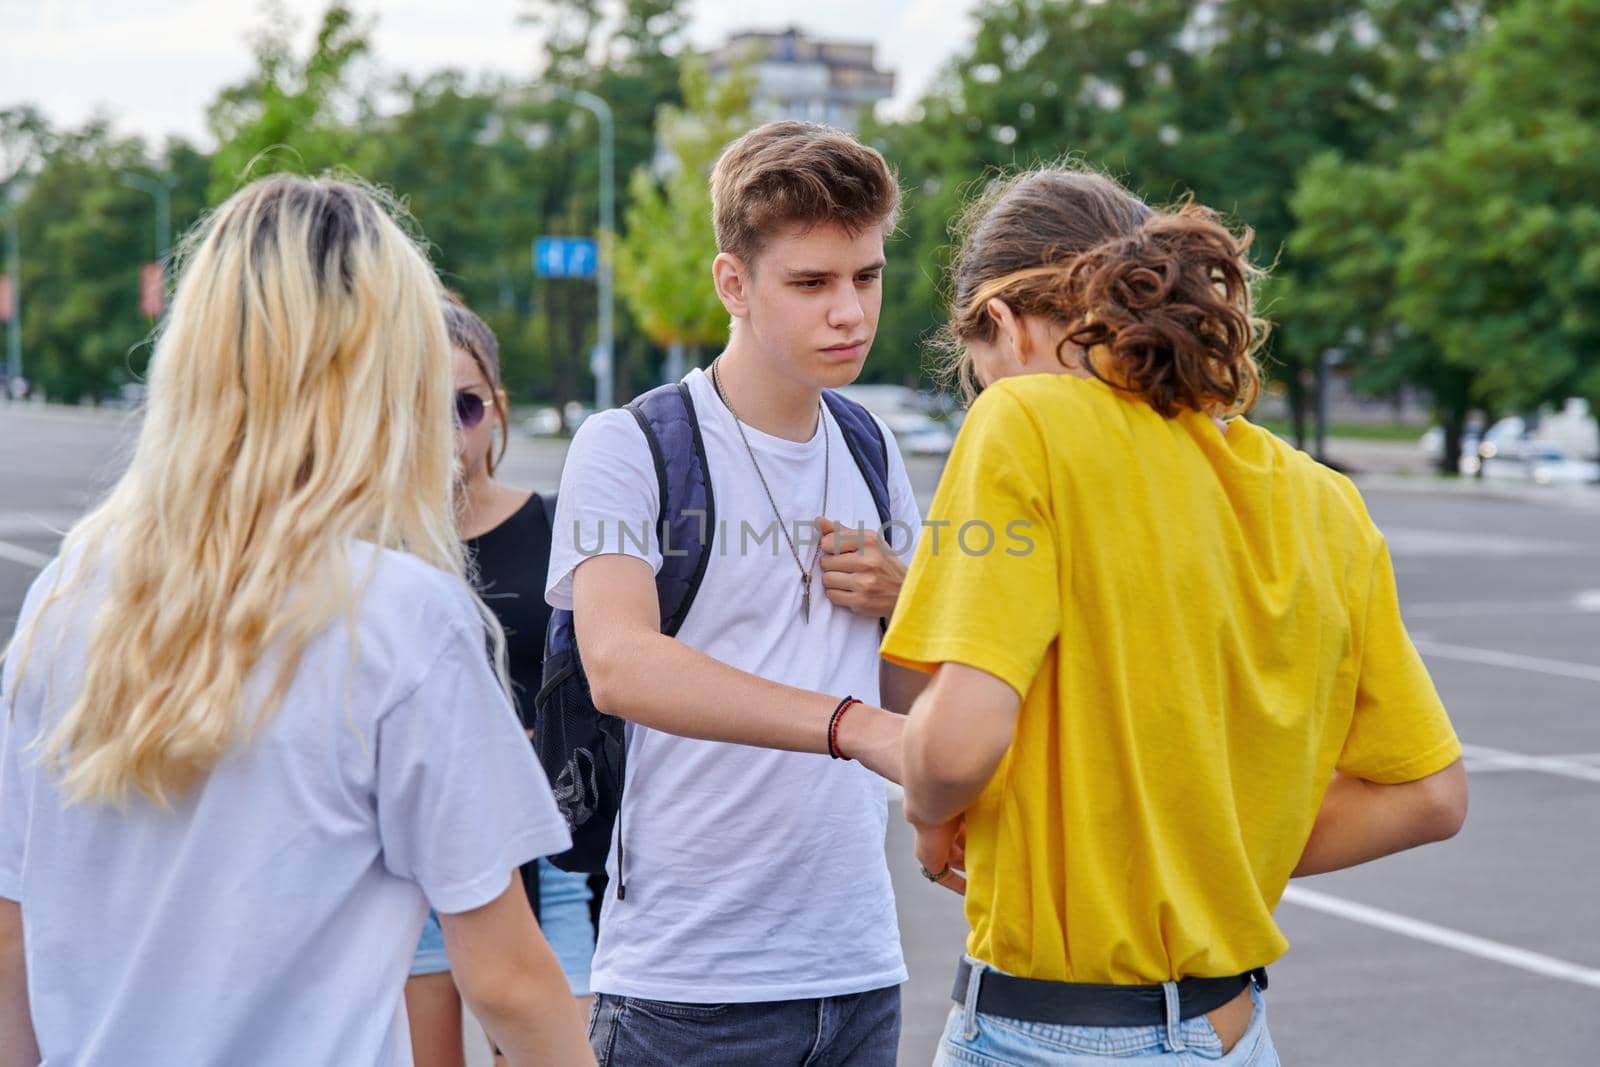 Group of teenagers in city, serious guy talking to friend. Teenagers, lifestyle, adolescence, modern youth concept